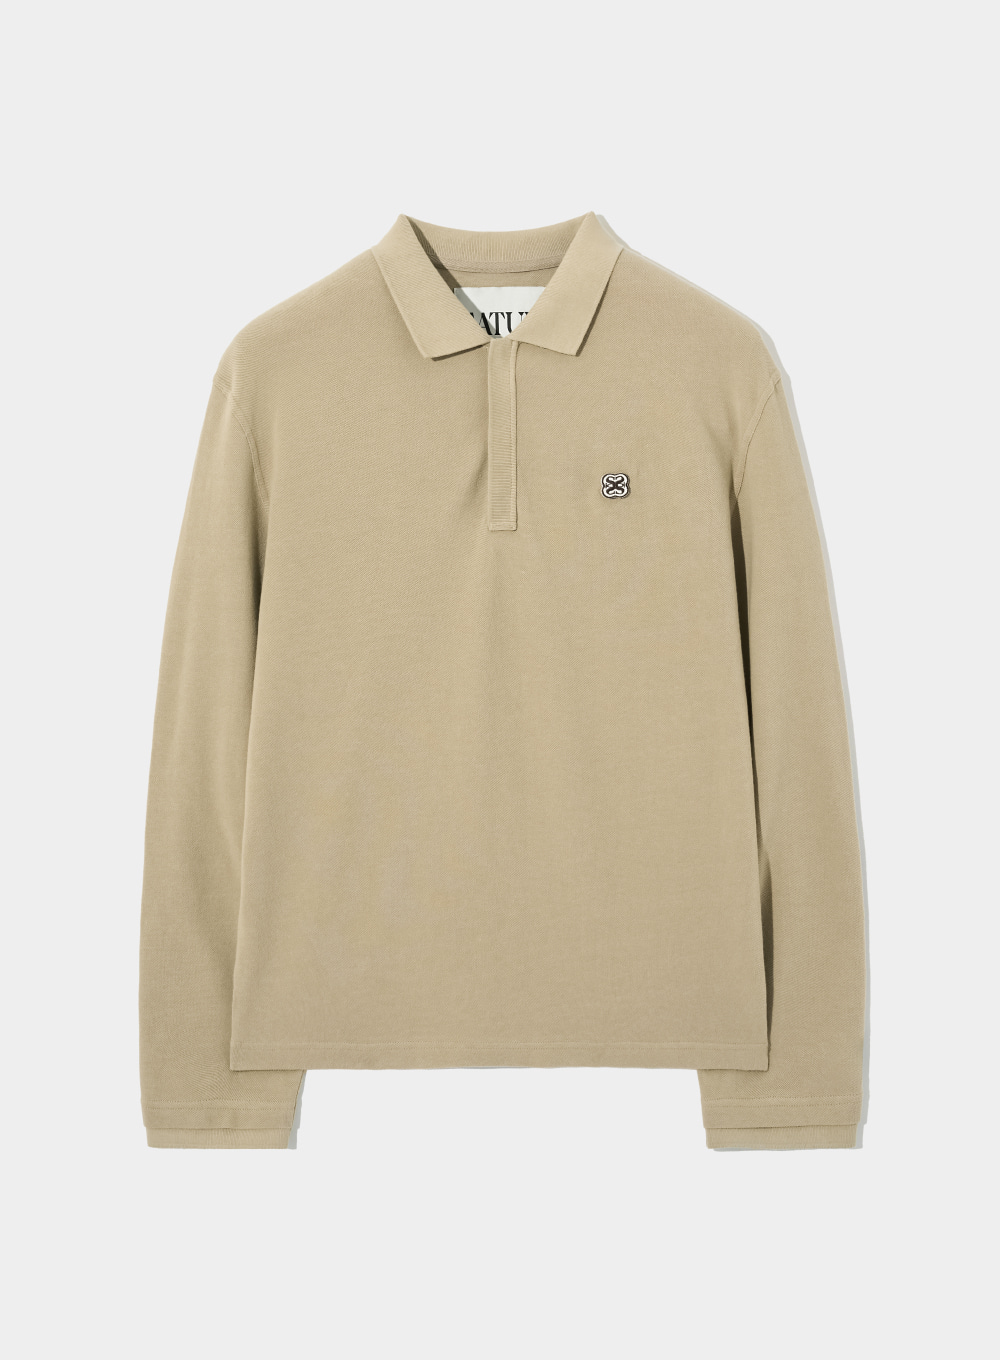 All Day Basic Pique Polo Long Sleeve - Soft Beige